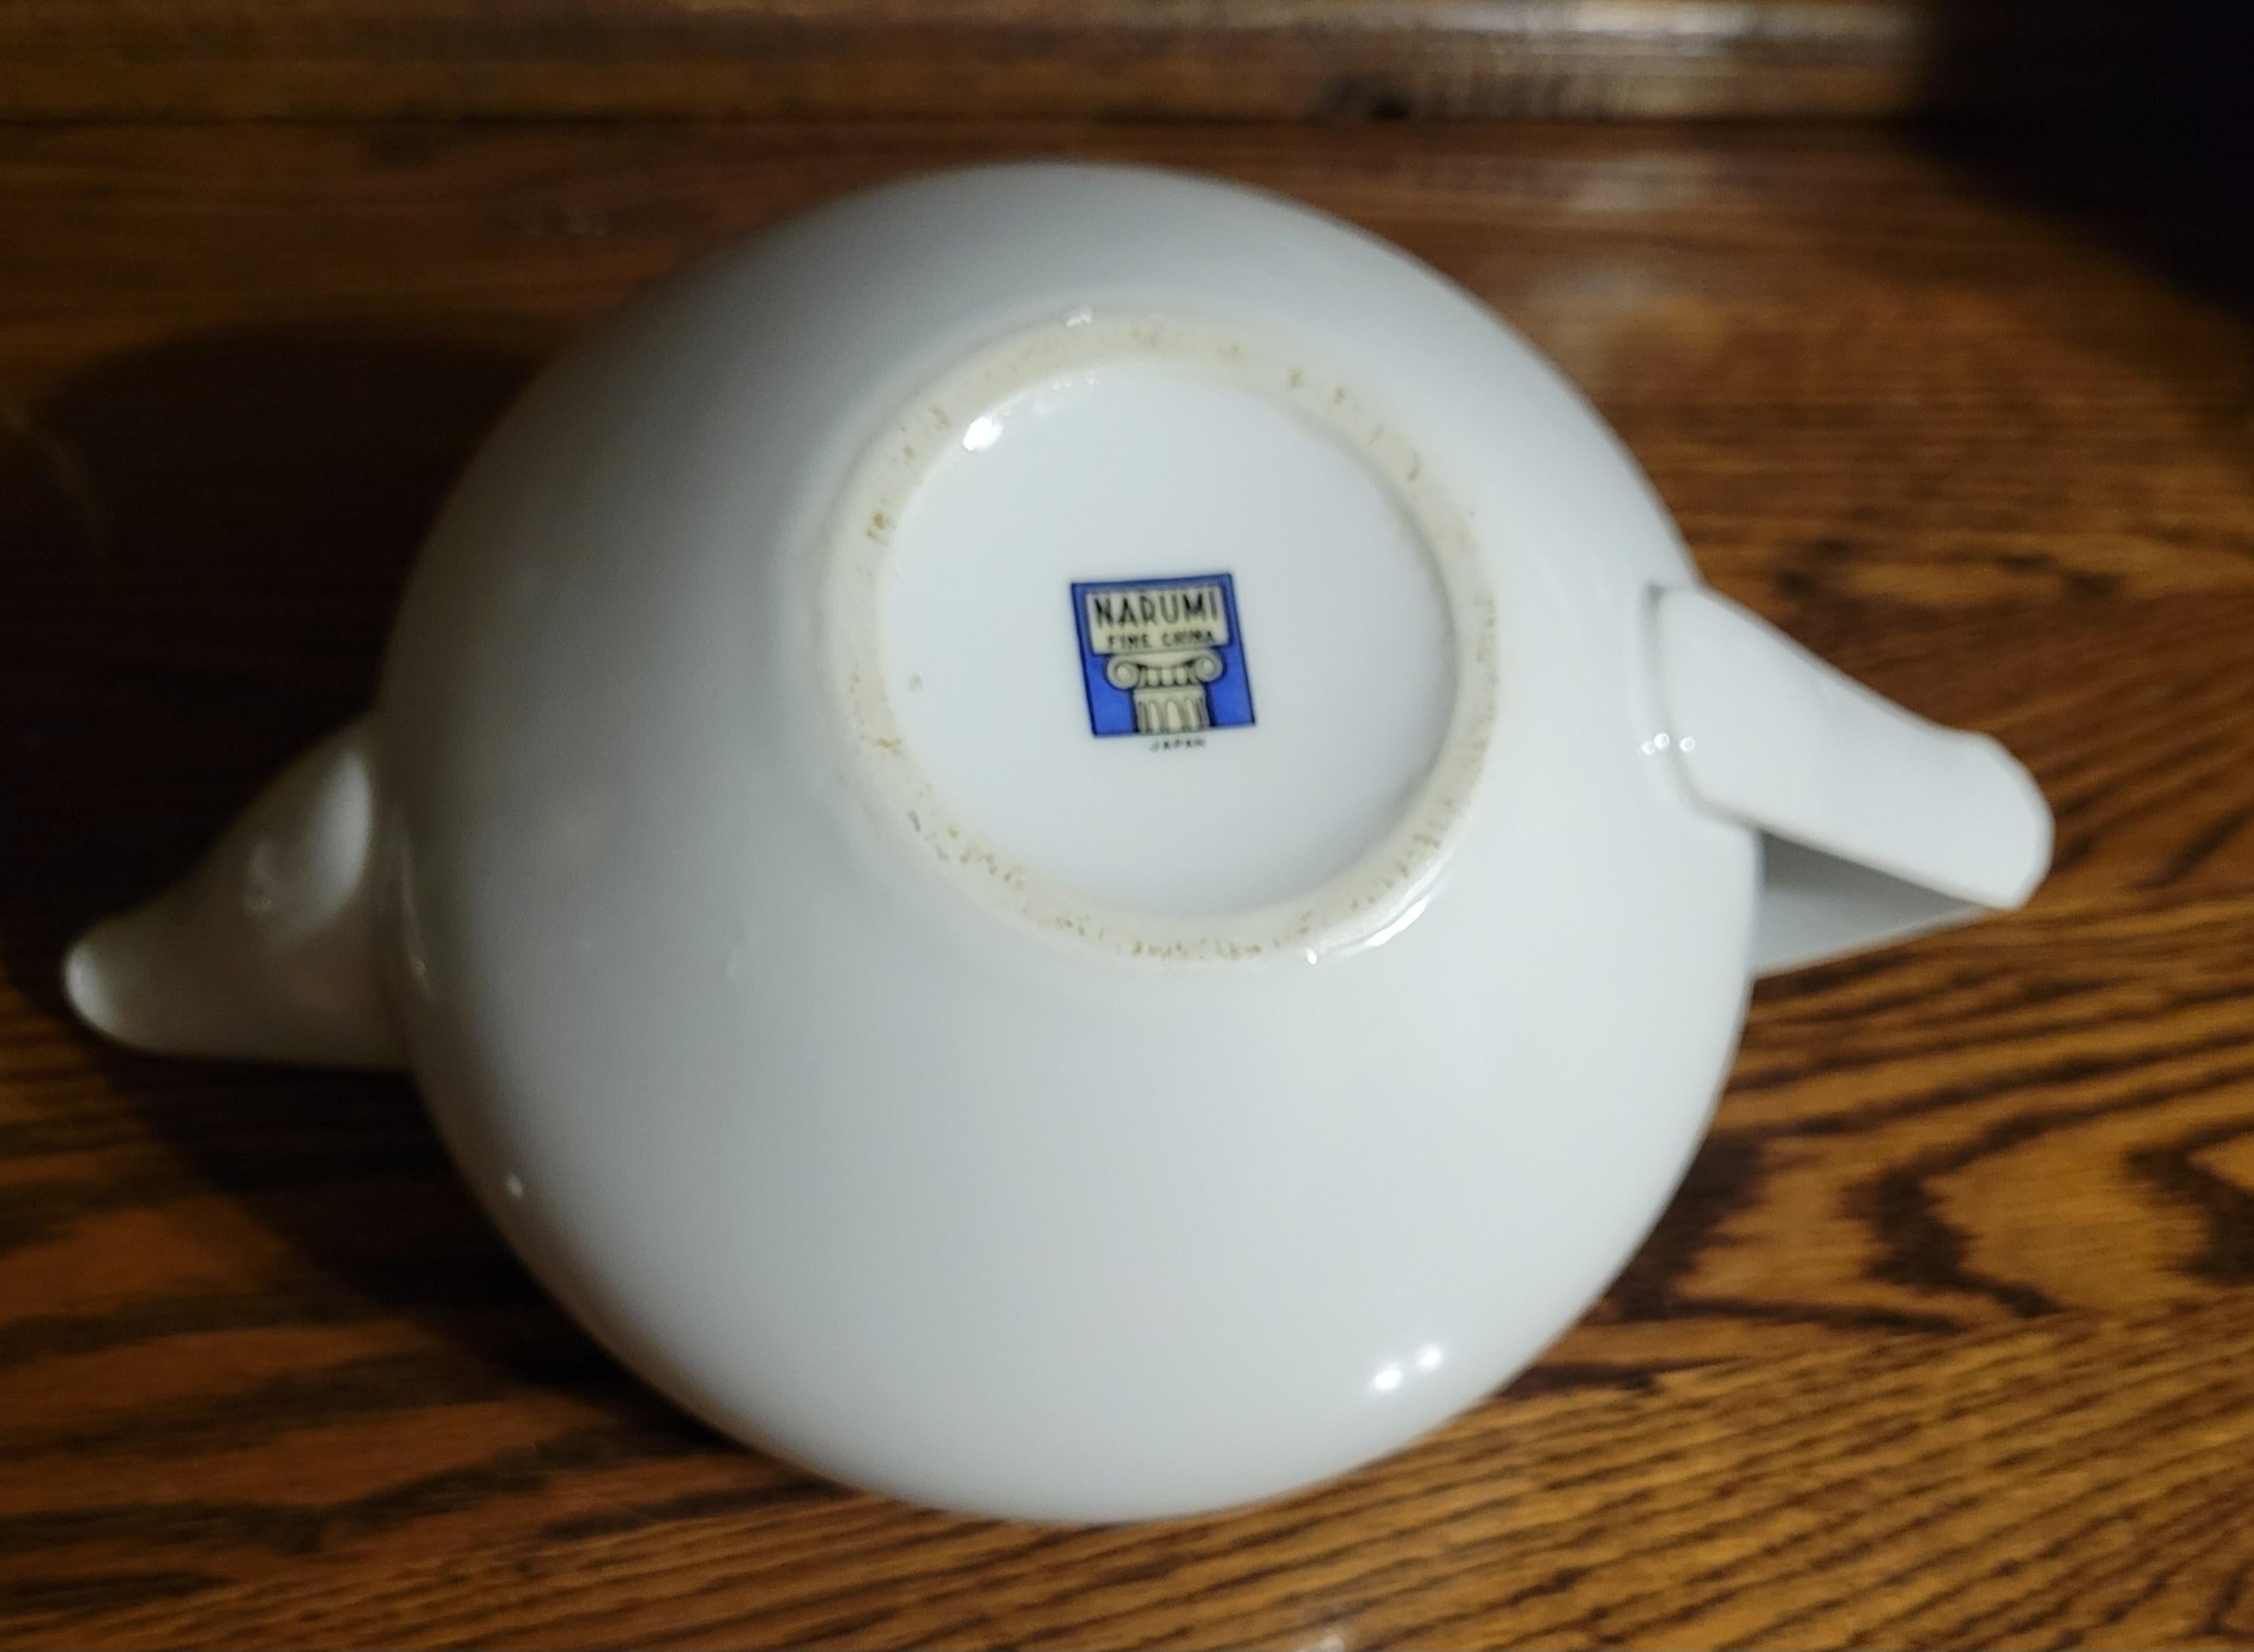 Rare, 1940-1950 Narumi Victory Rose teapot. The teapot is about 20